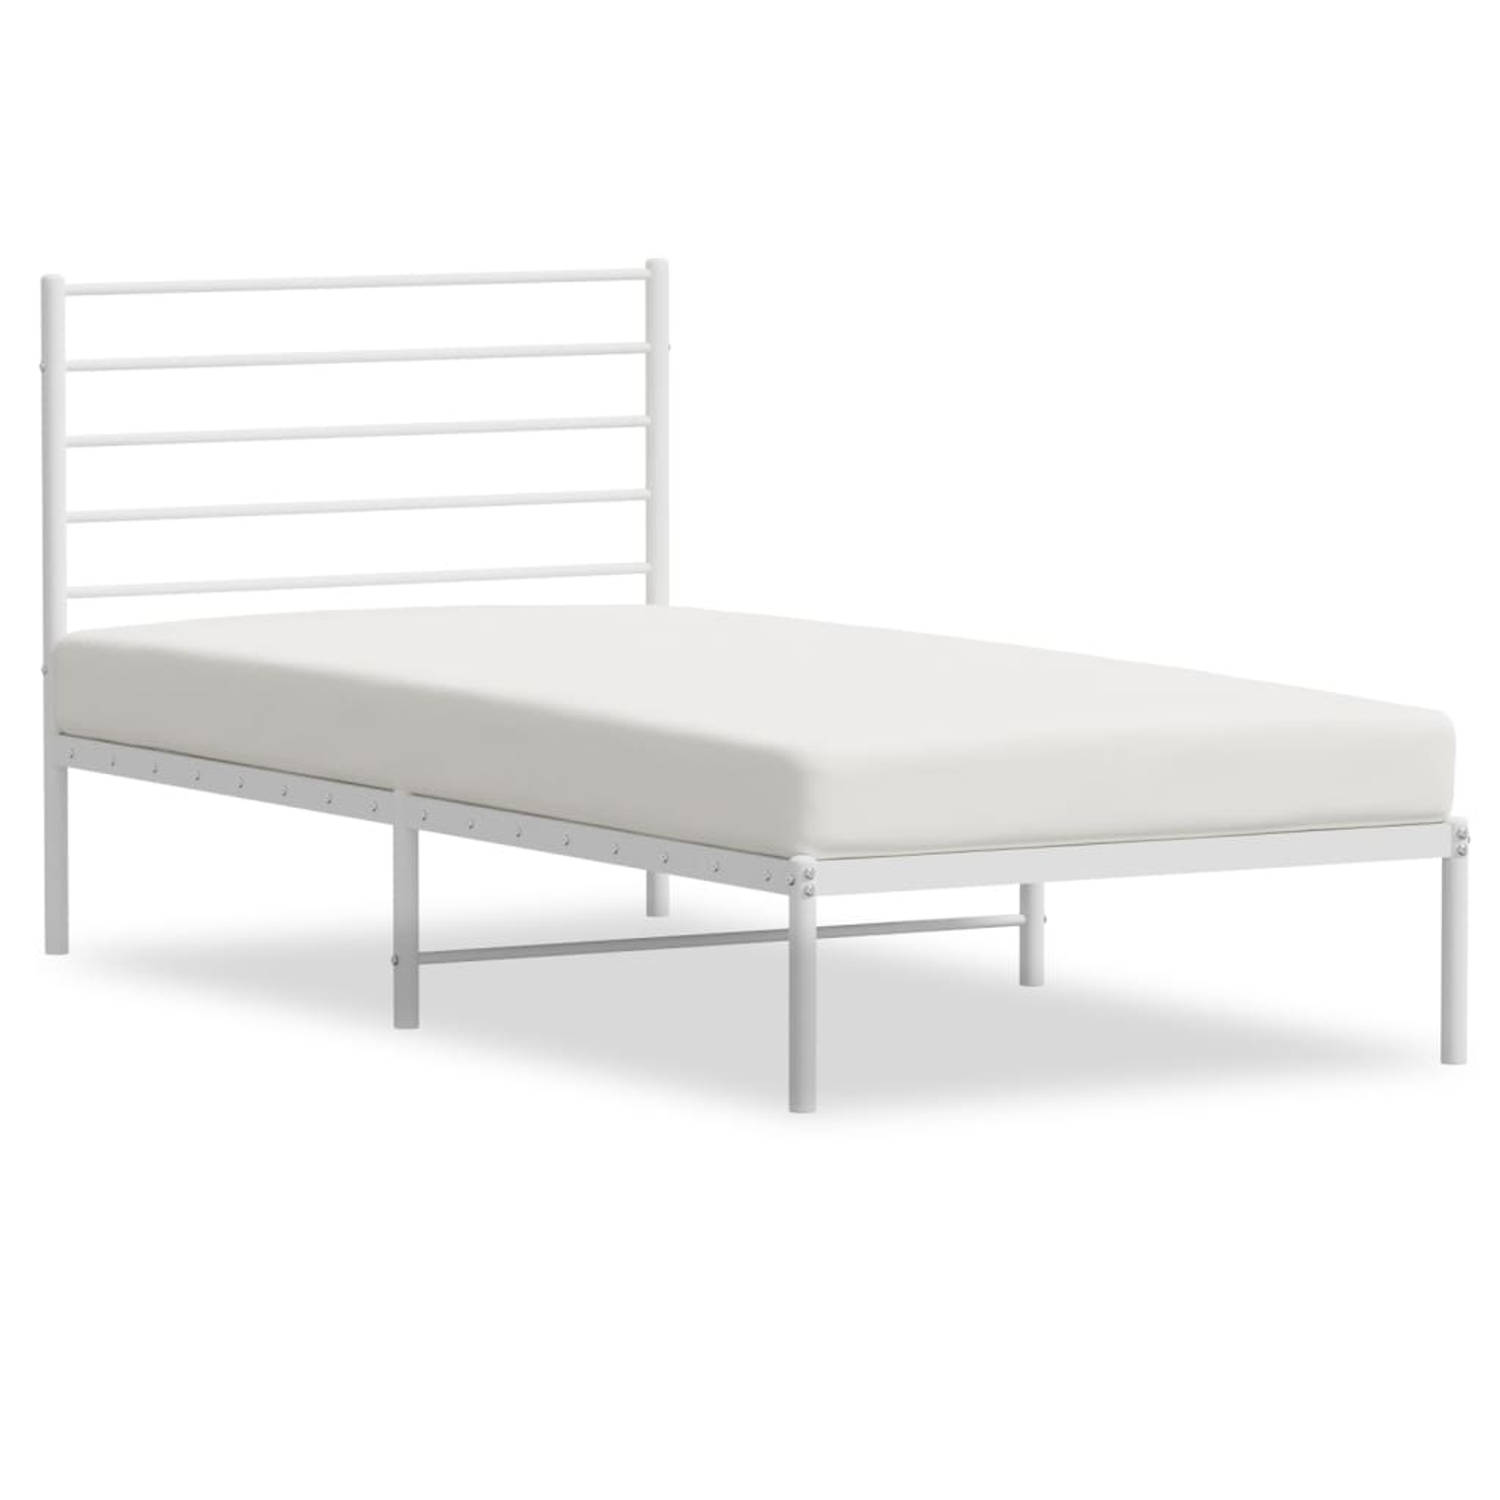 The Living Store Bedframe The Living Store Basic Bedframe - 207 x 105 x 90 cm - Robuust metaal